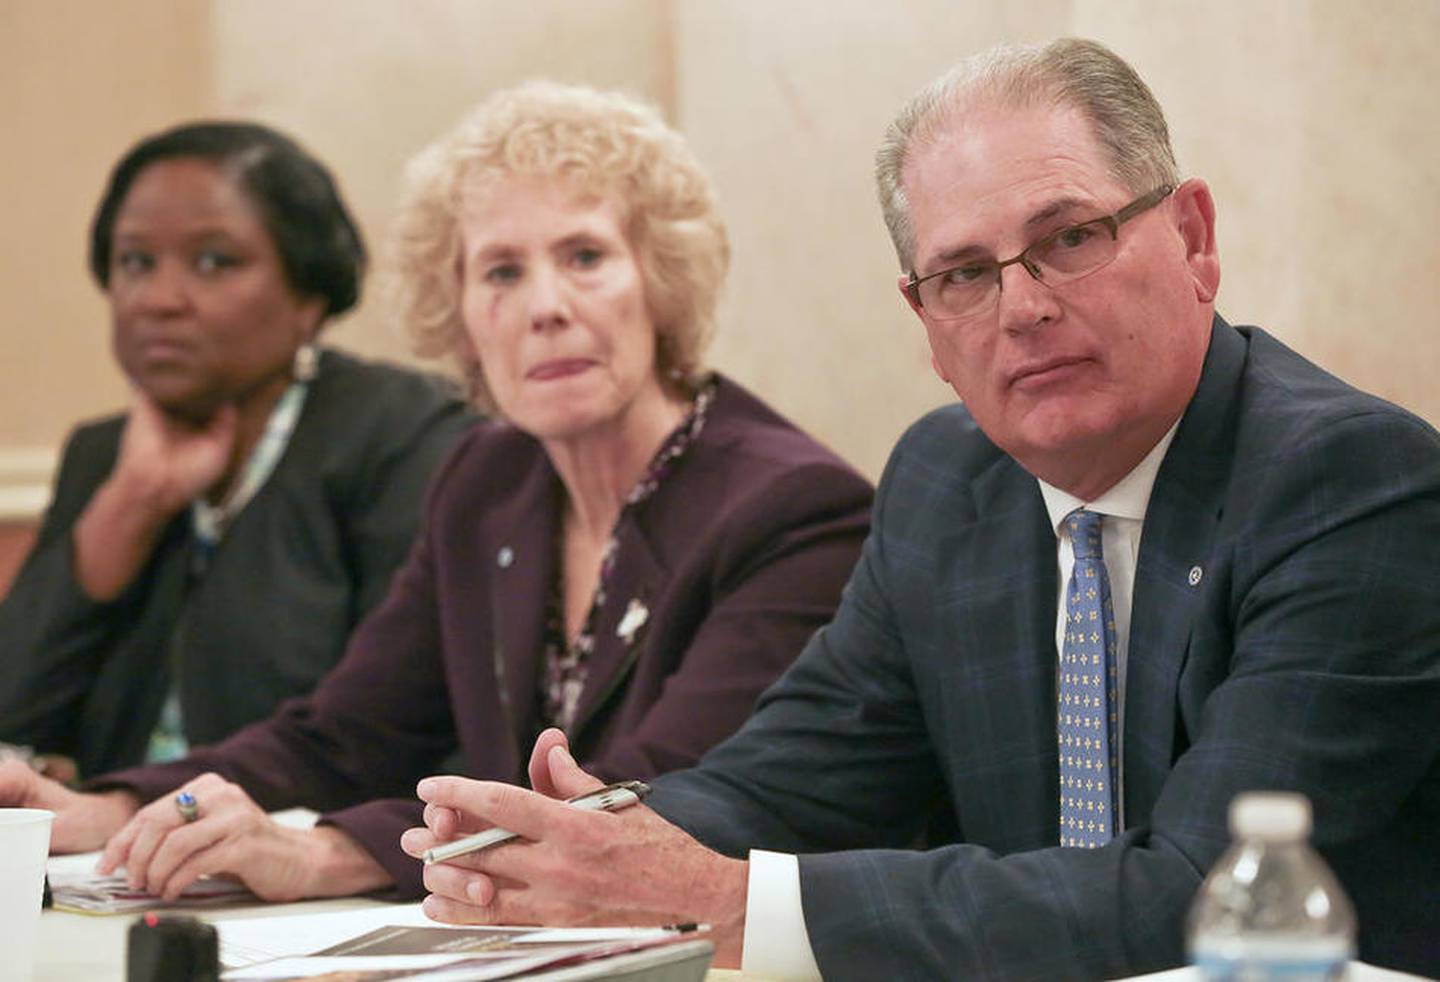 Members of the new Rialto Square Theater board meet for the first time since they were appointed by Mayor Bob O'Dekirk and Gov. Bruce Rauner on Wednesday, January 25, 2017, in Joliet, Illinois.  Robert Filotto (right), an accountant who owns Filotto Professional Services in Joliet, was elected chairman of the board.